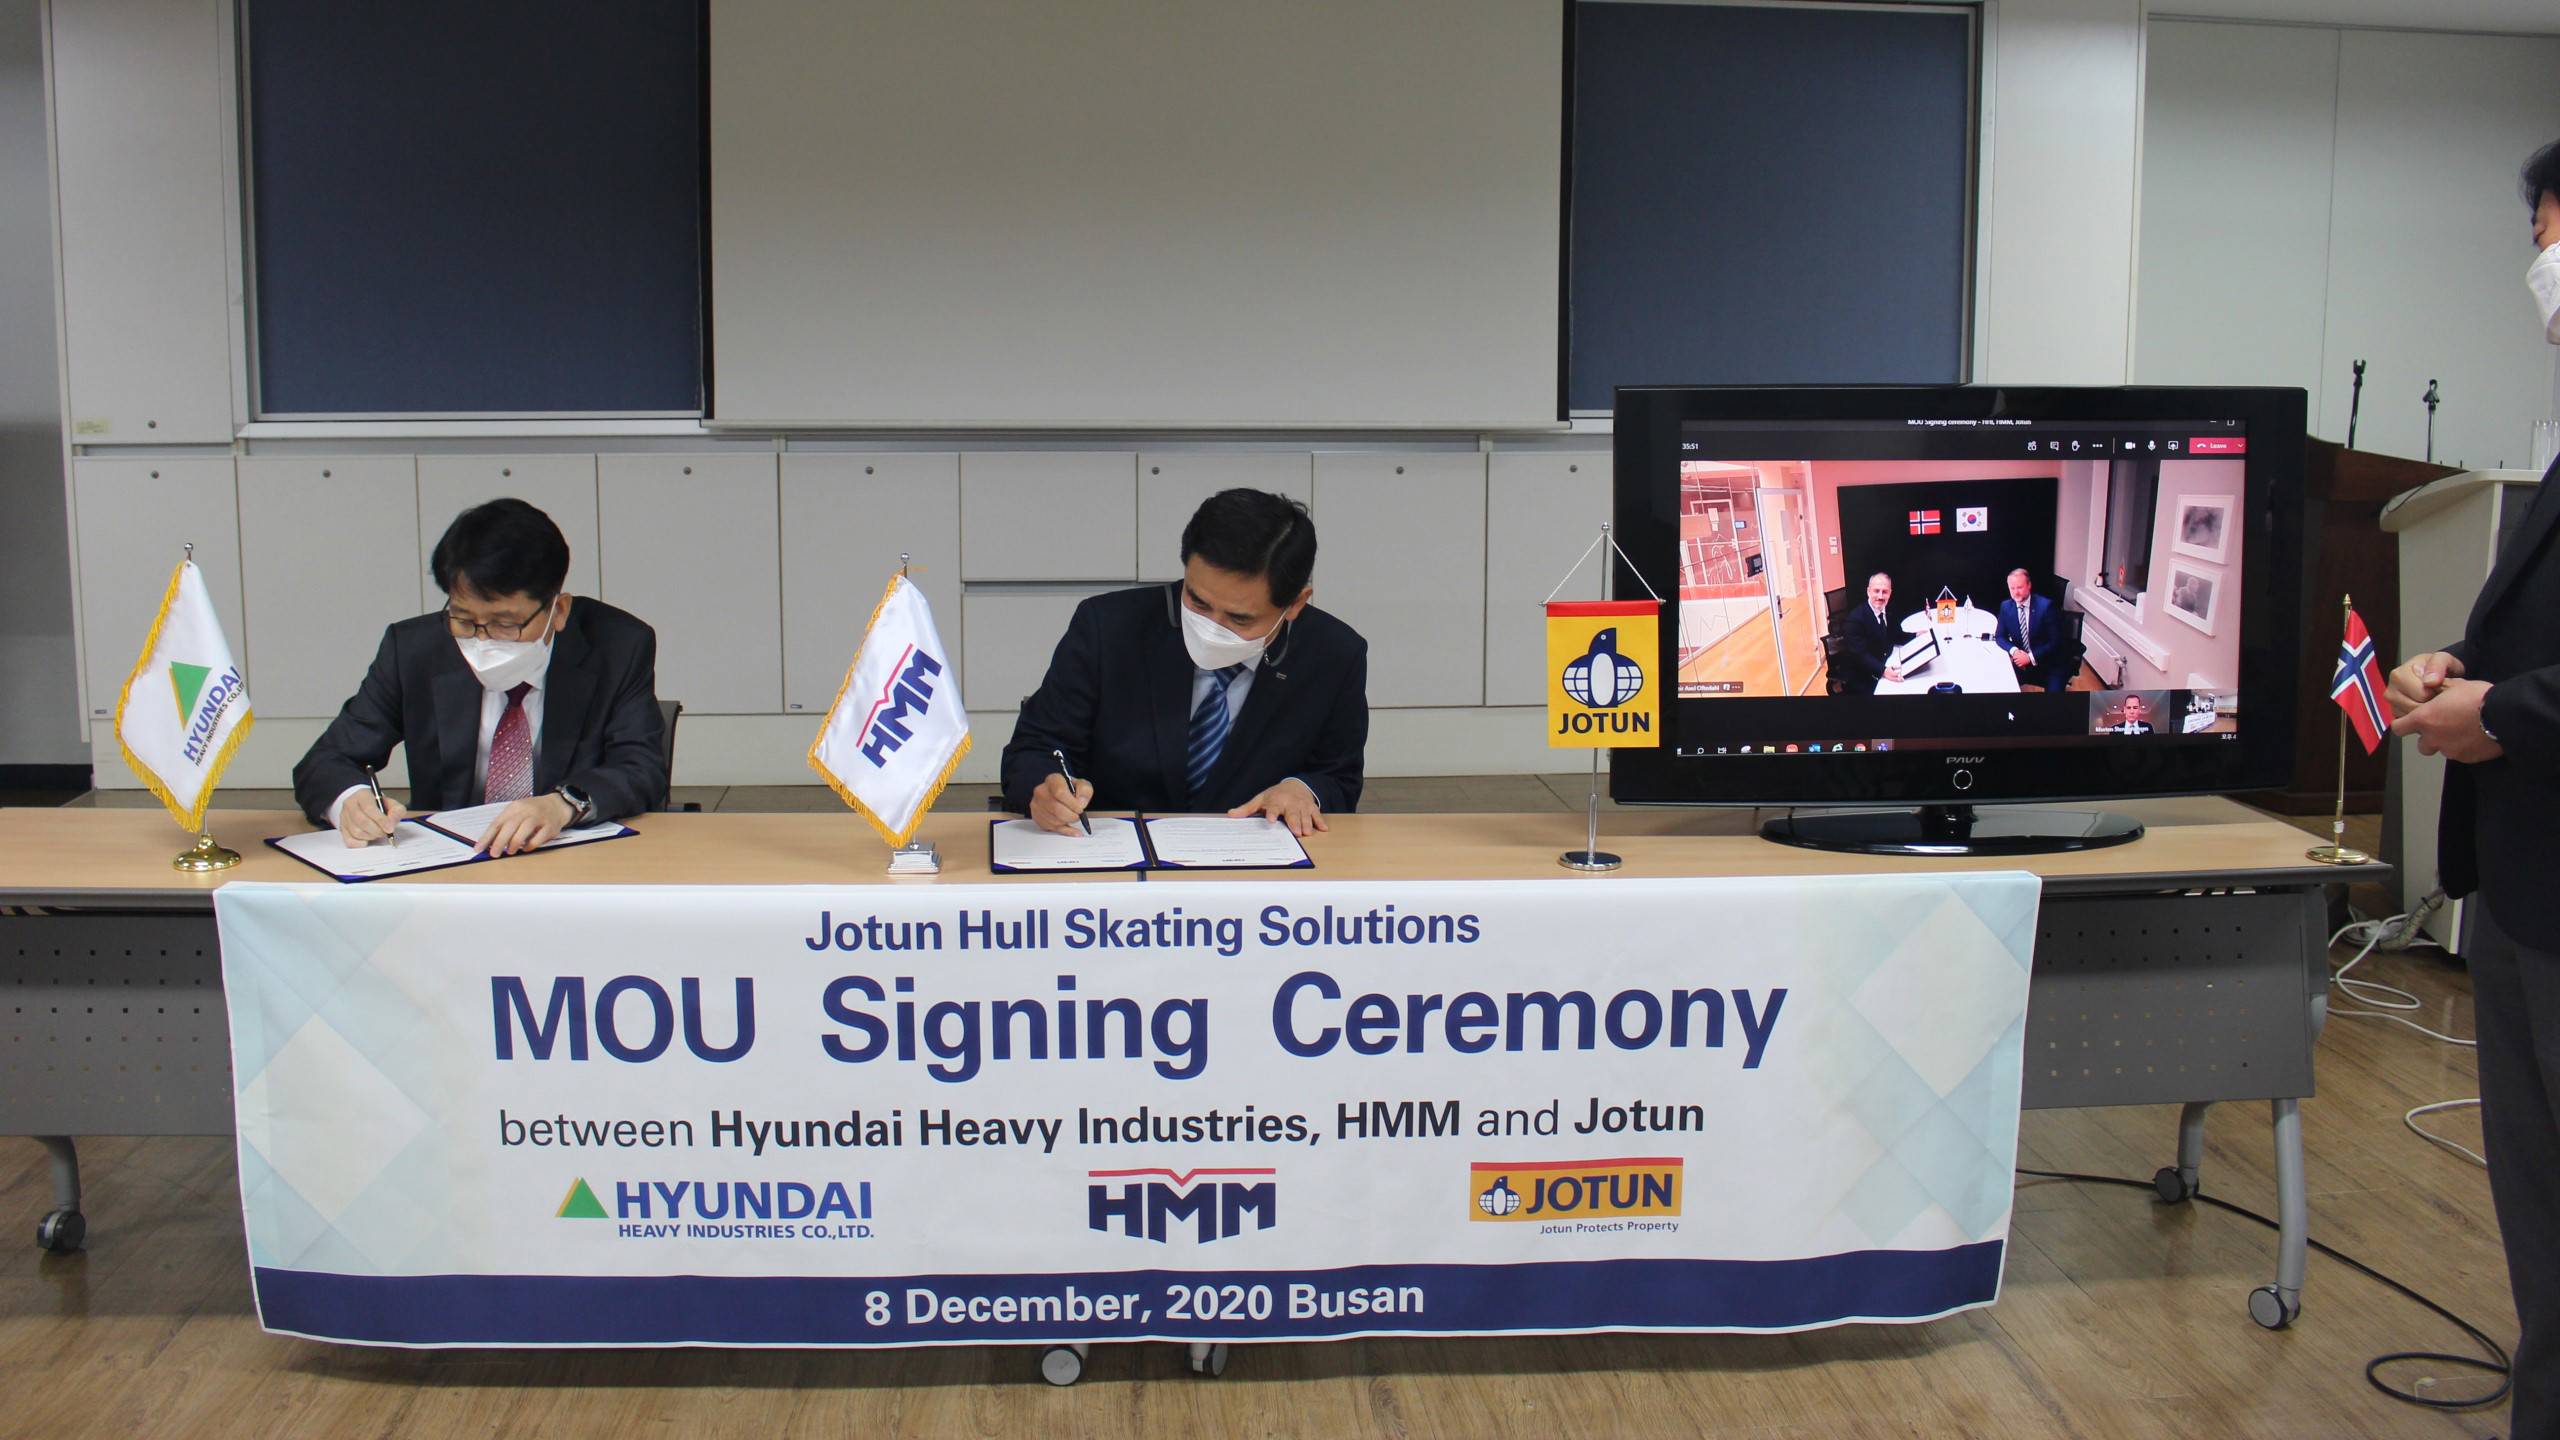 Jotun, HMM Co ltd and Hyundai Heavy Industries (HHI) signing ceremony